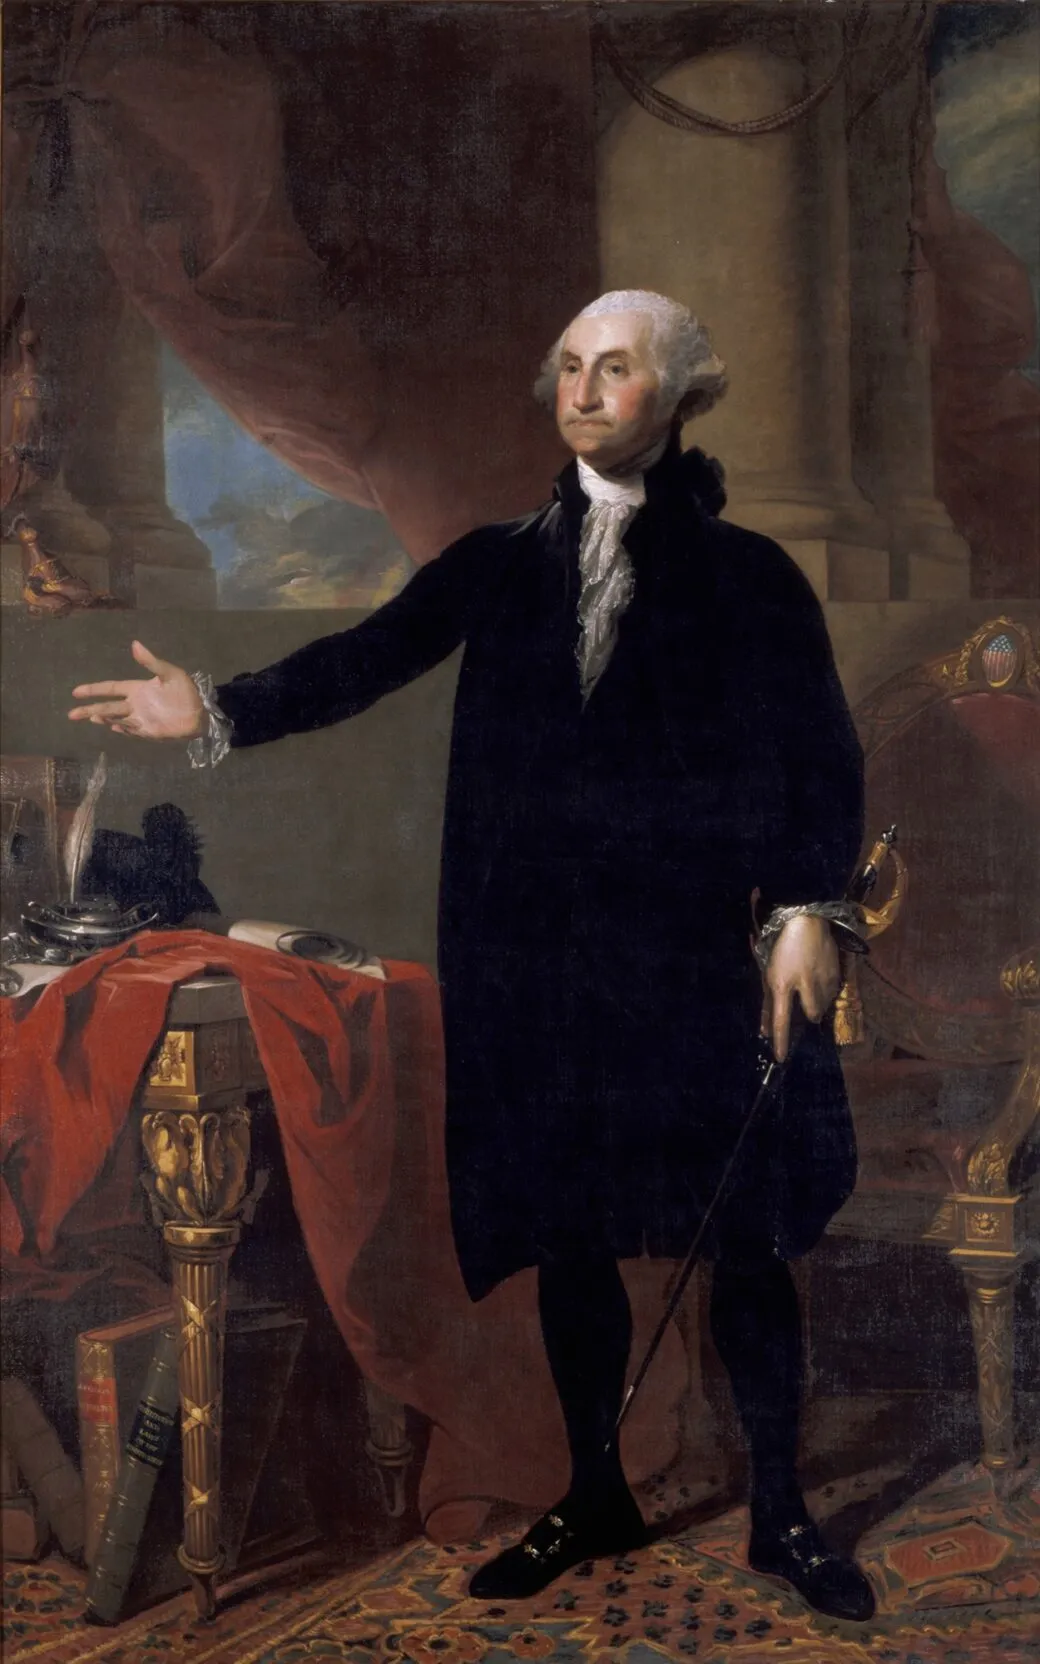 Washington depicted in a period painting giving his farewell address.